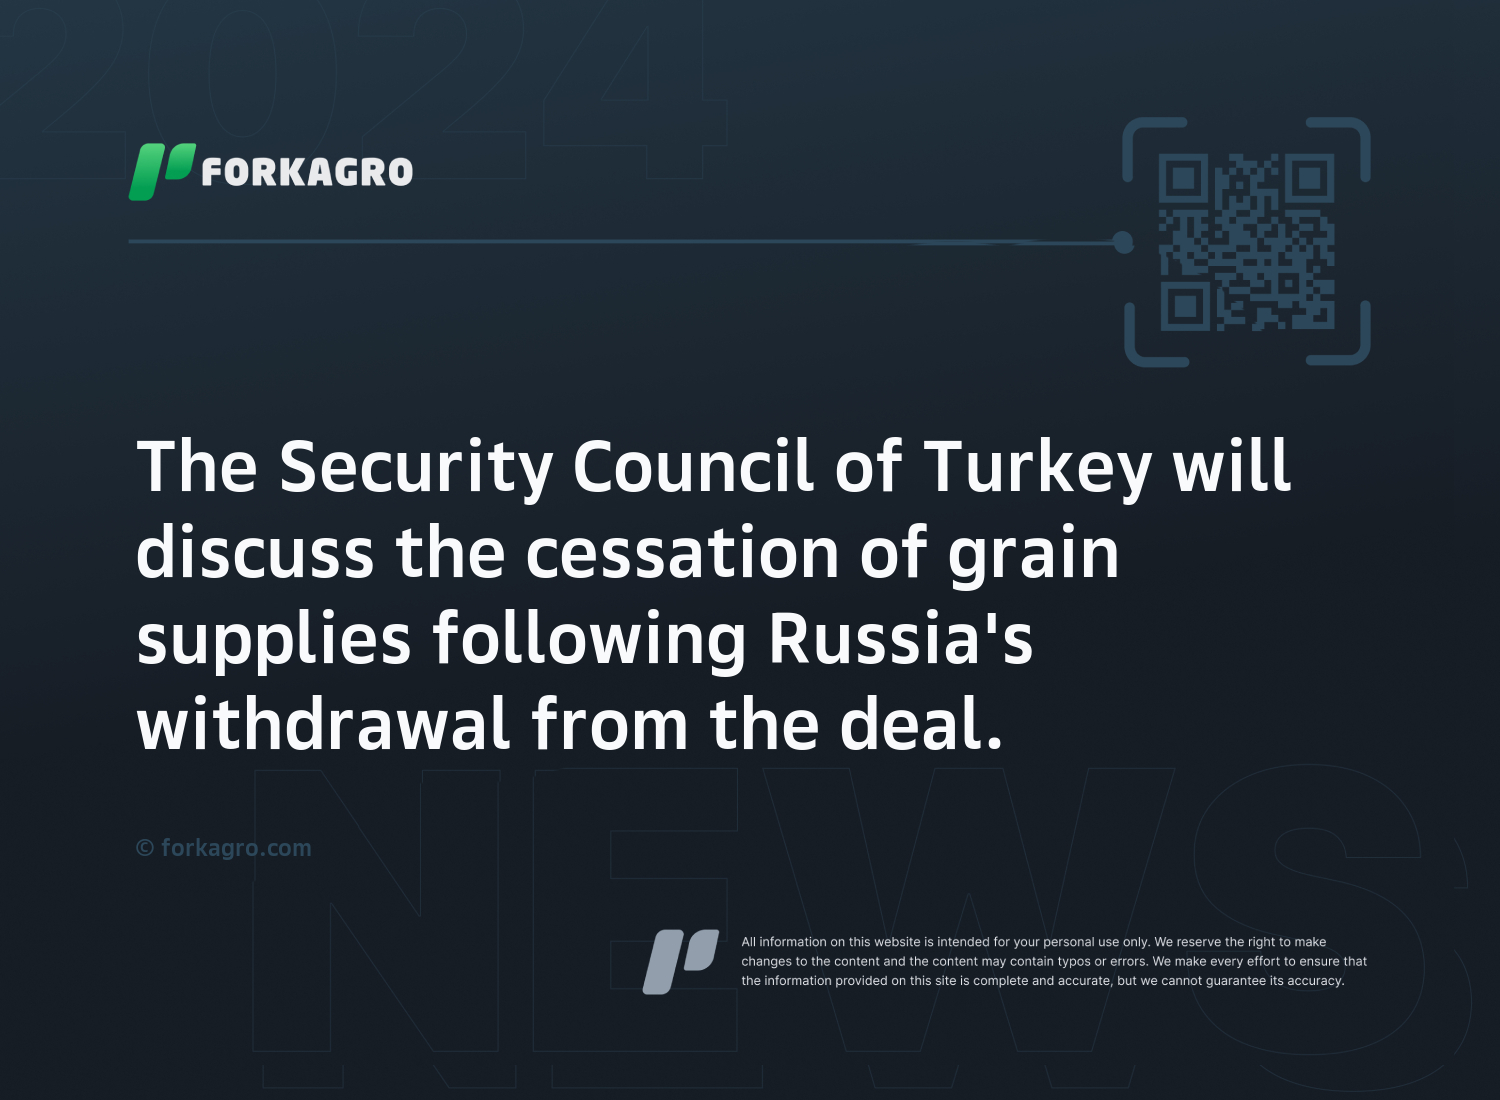 The Security Council of Turkey will discuss the cessation of grain supplies following Russia's withdrawal from the deal.